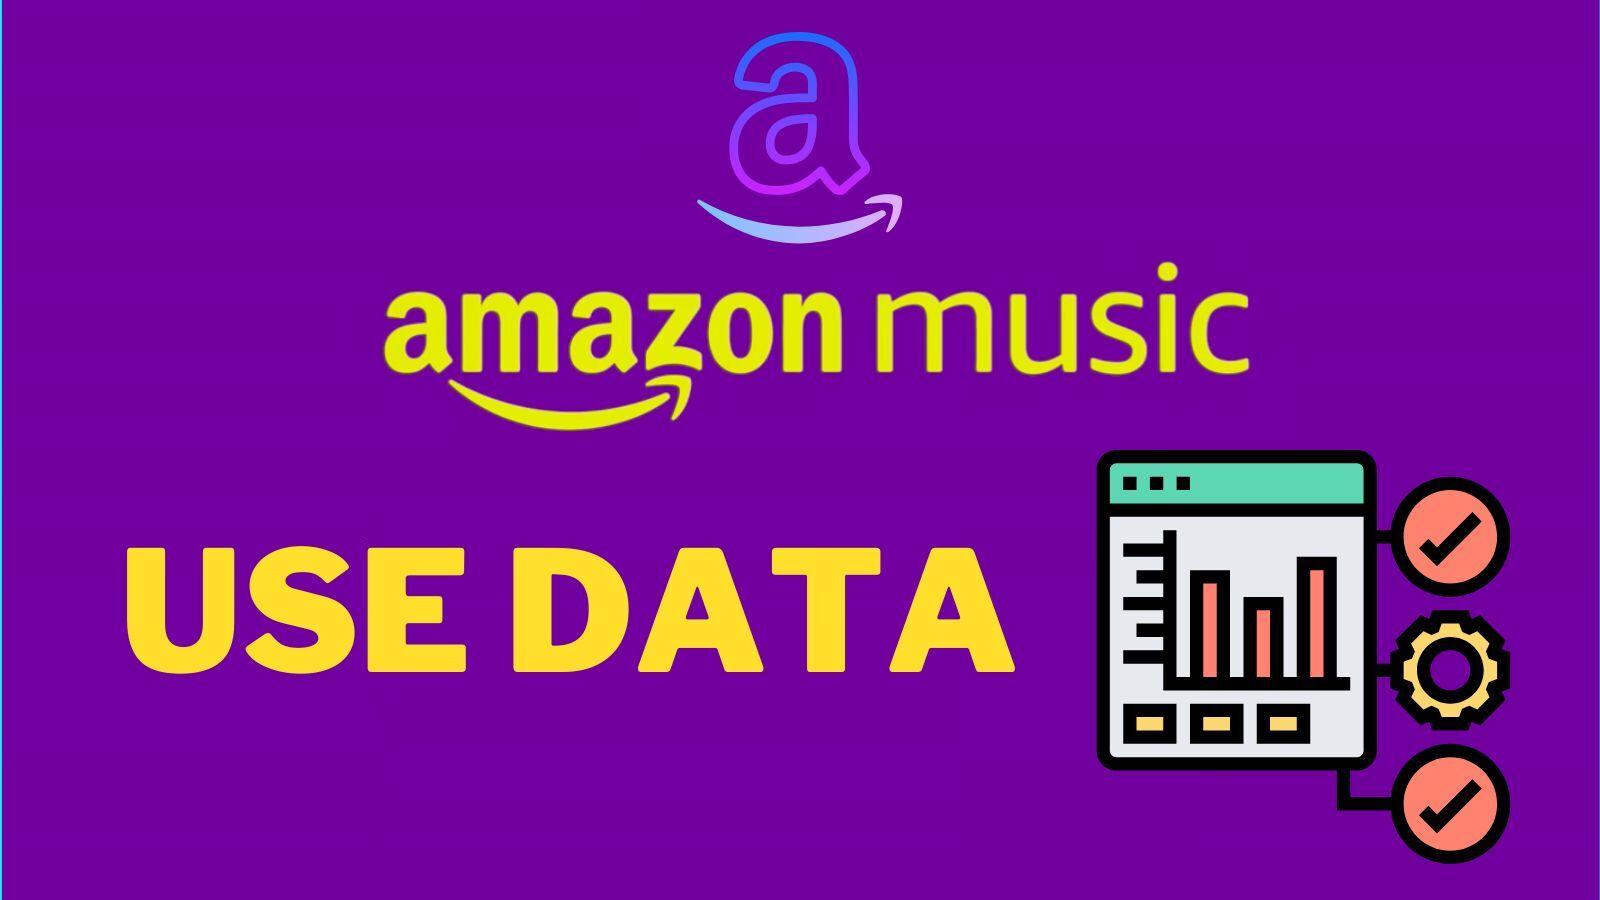 Does Amazon Music Use Data? (How Much Is Used & How to Reduce)